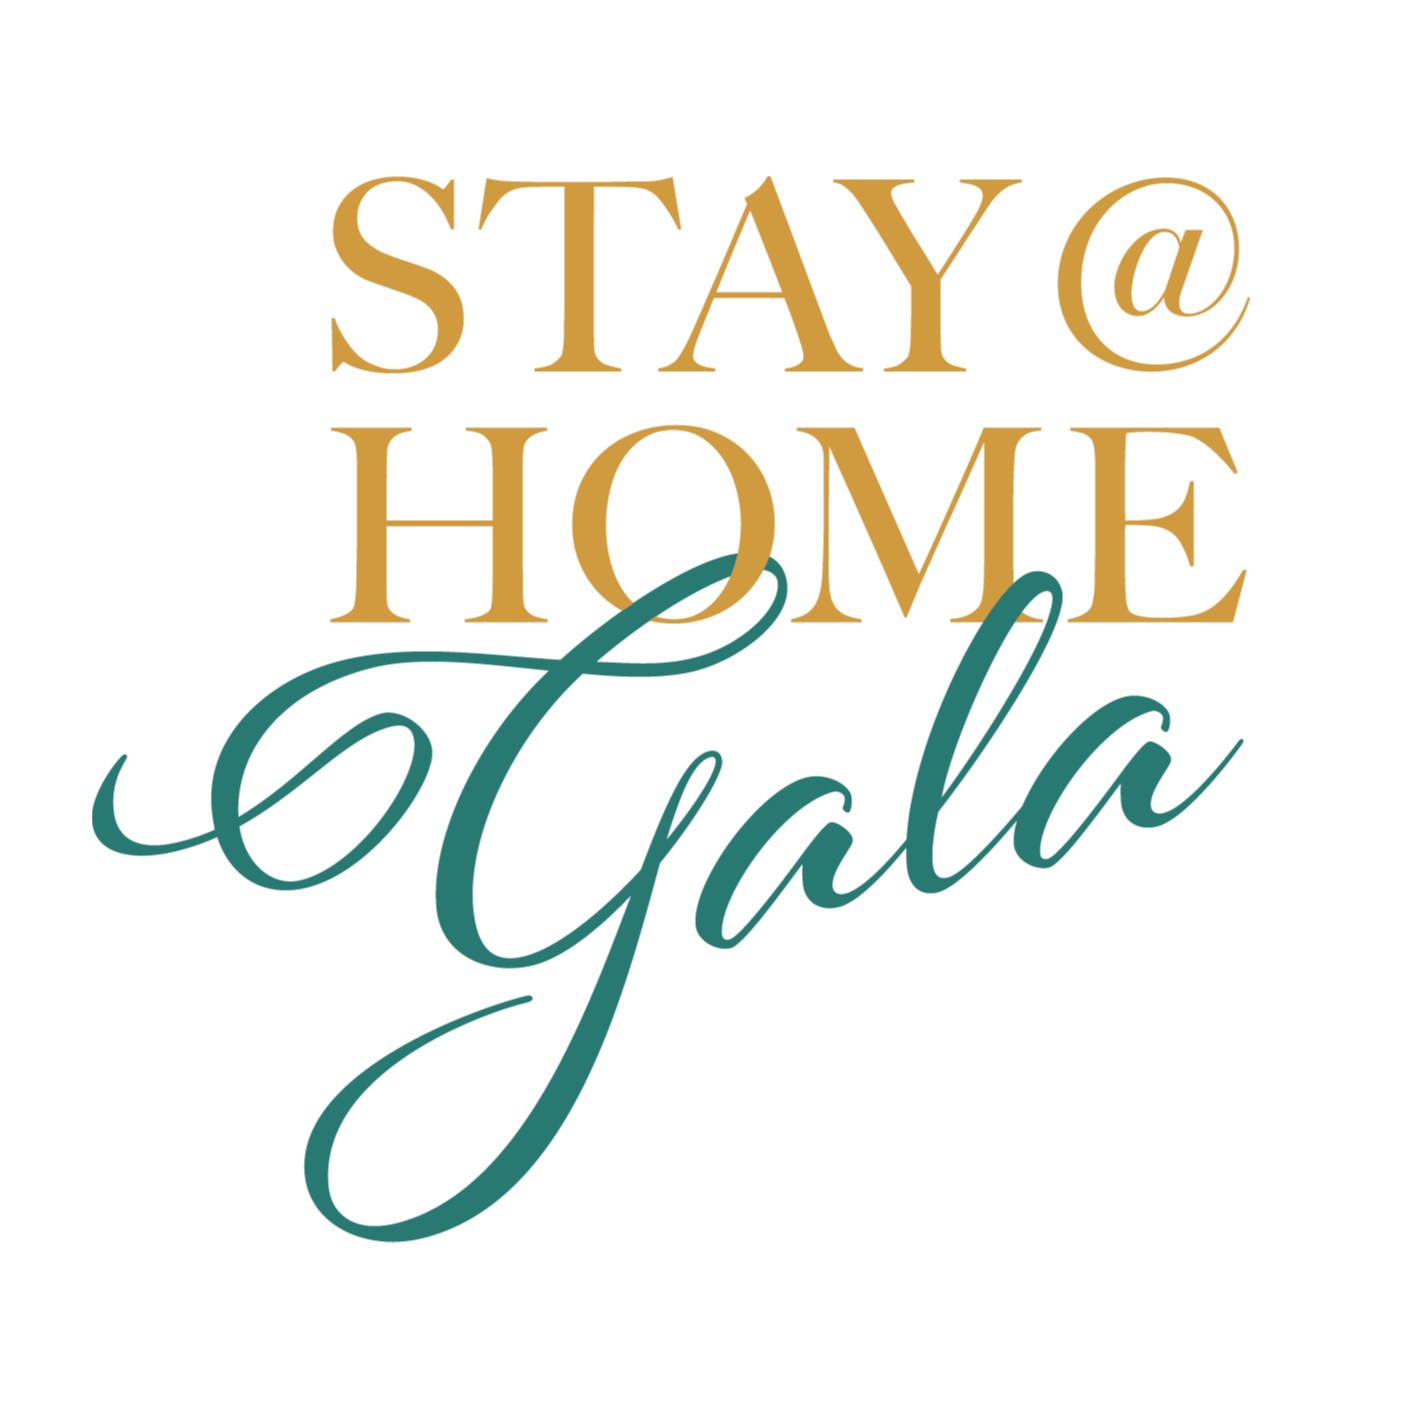 Stay At Home Gala Team's Logo